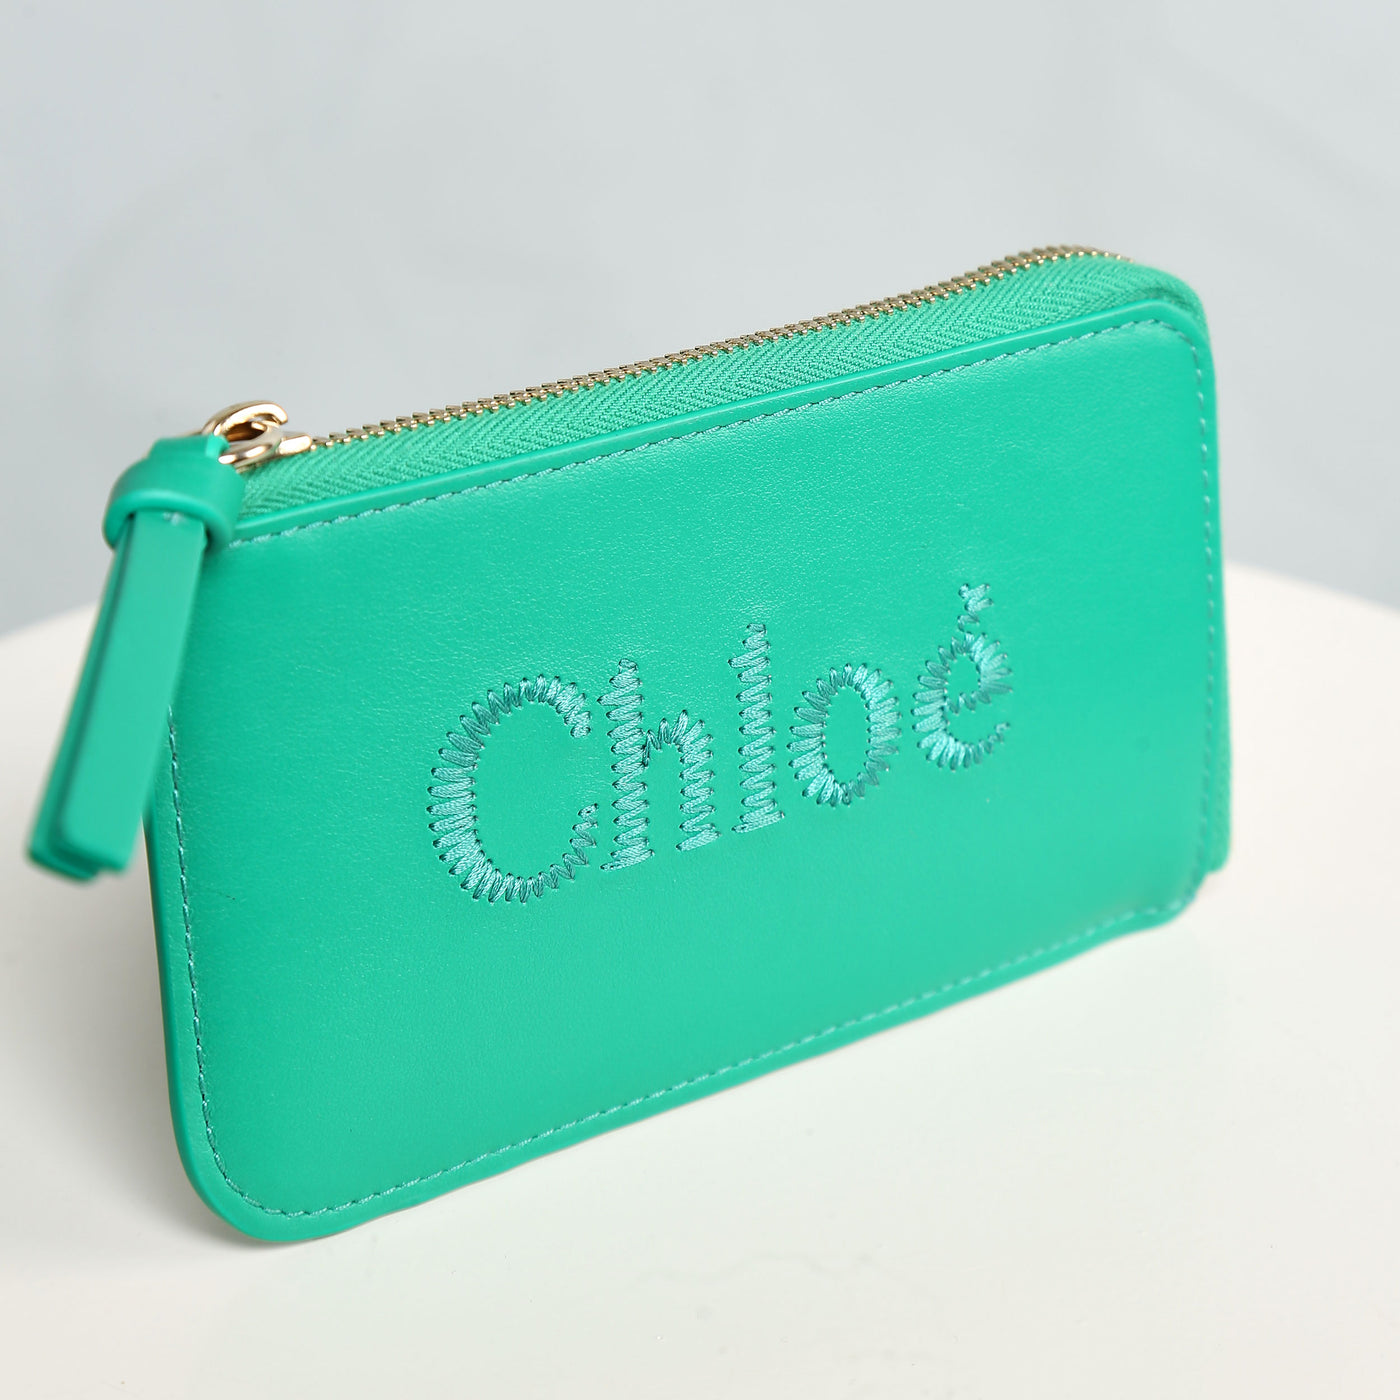 Green CHLOÉ Sense Coin Purse With Chloé Logo Embroidered On The Front